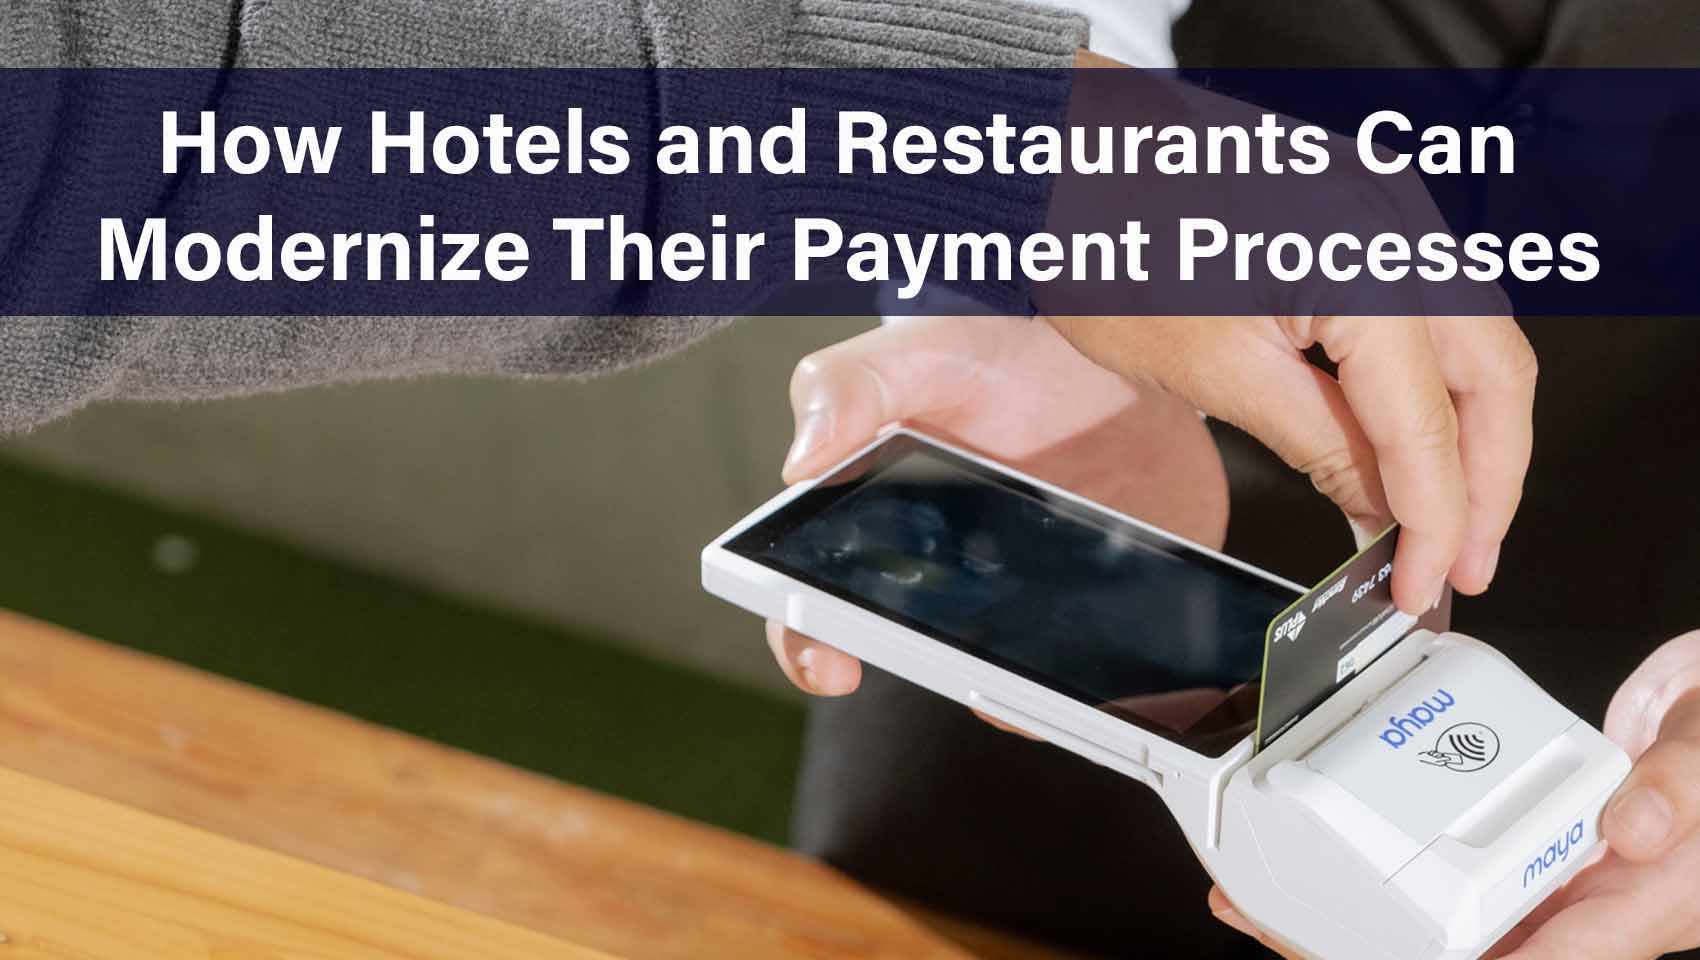 How Hotels and Restaurants Can Modernize Their Payment Processes